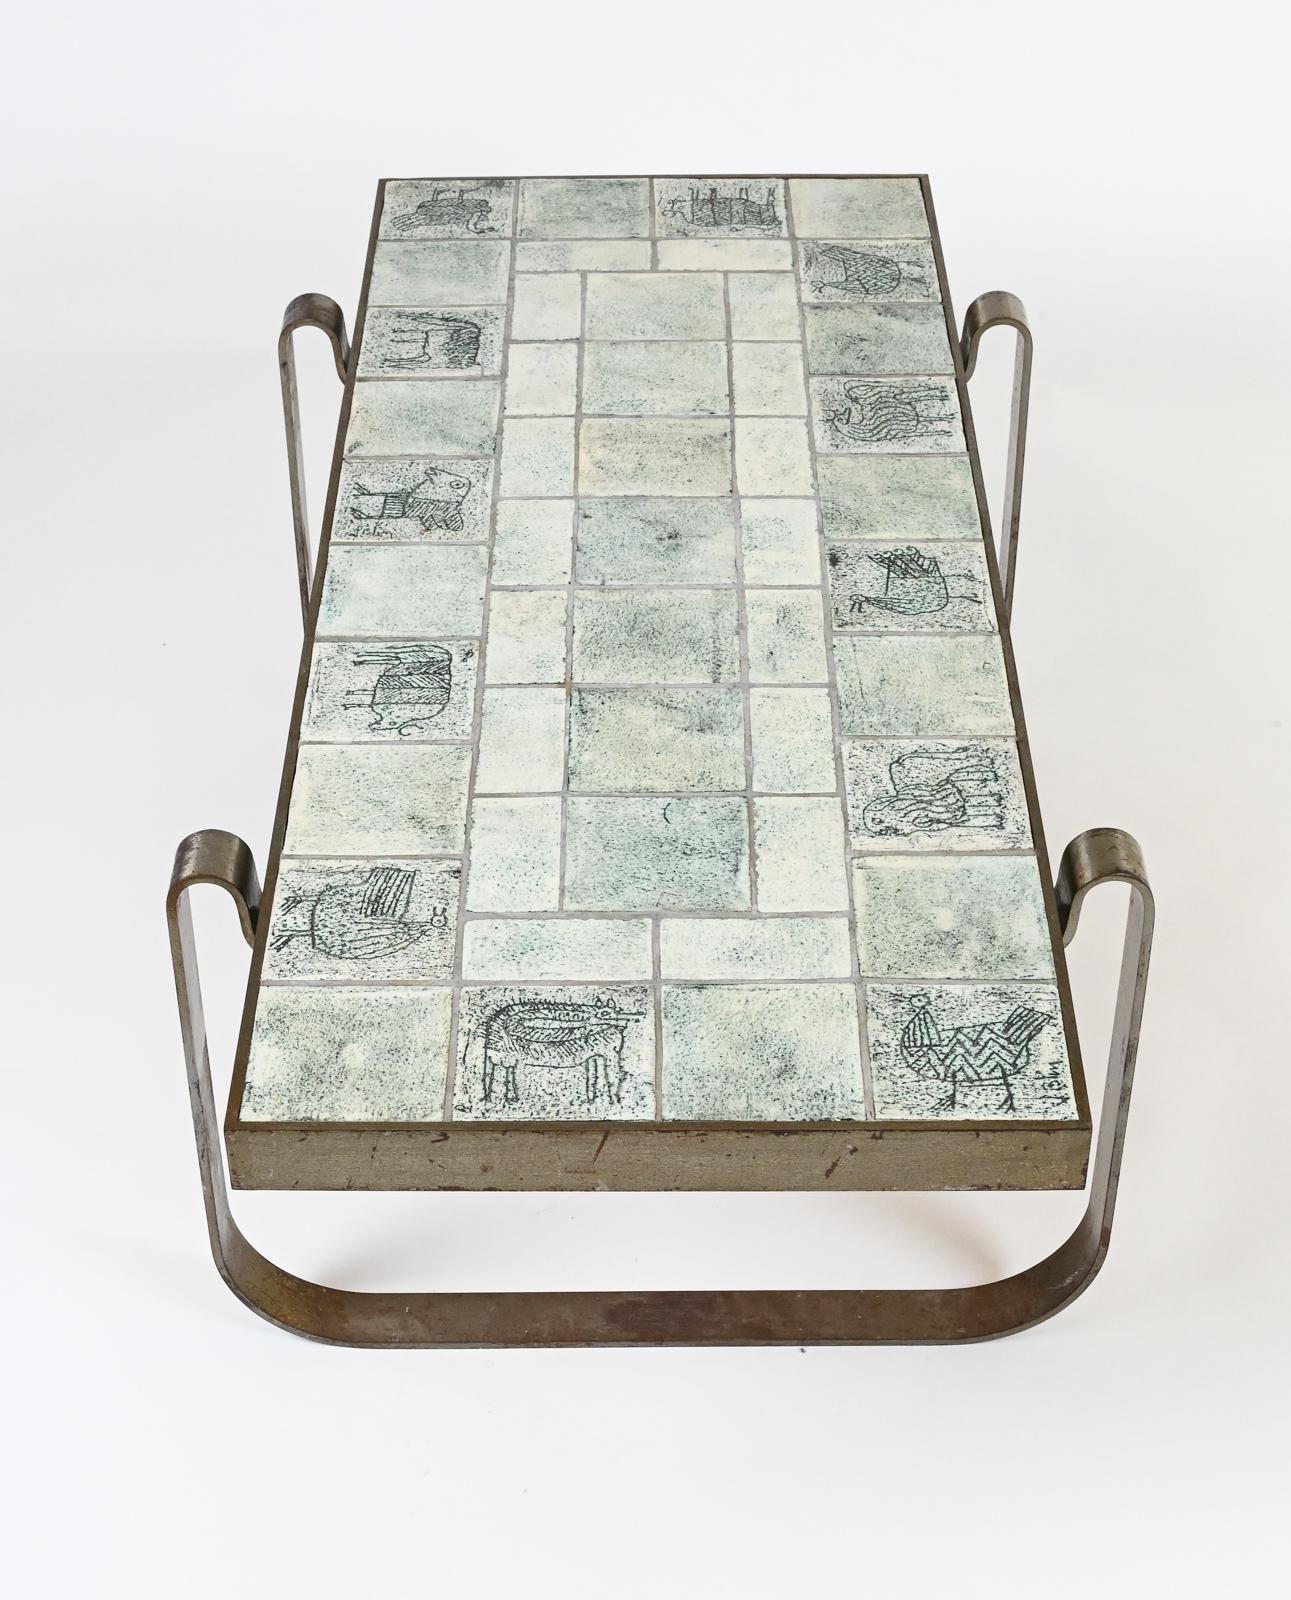 Rare modernist midcentury steel-framed low table composed of ceramic tiles of animals by Jacques Blin.
Jacques Blin, born in France in 1920 originally trained in engineering diploma. In 1954, choosing to follow his passion, he founded his own